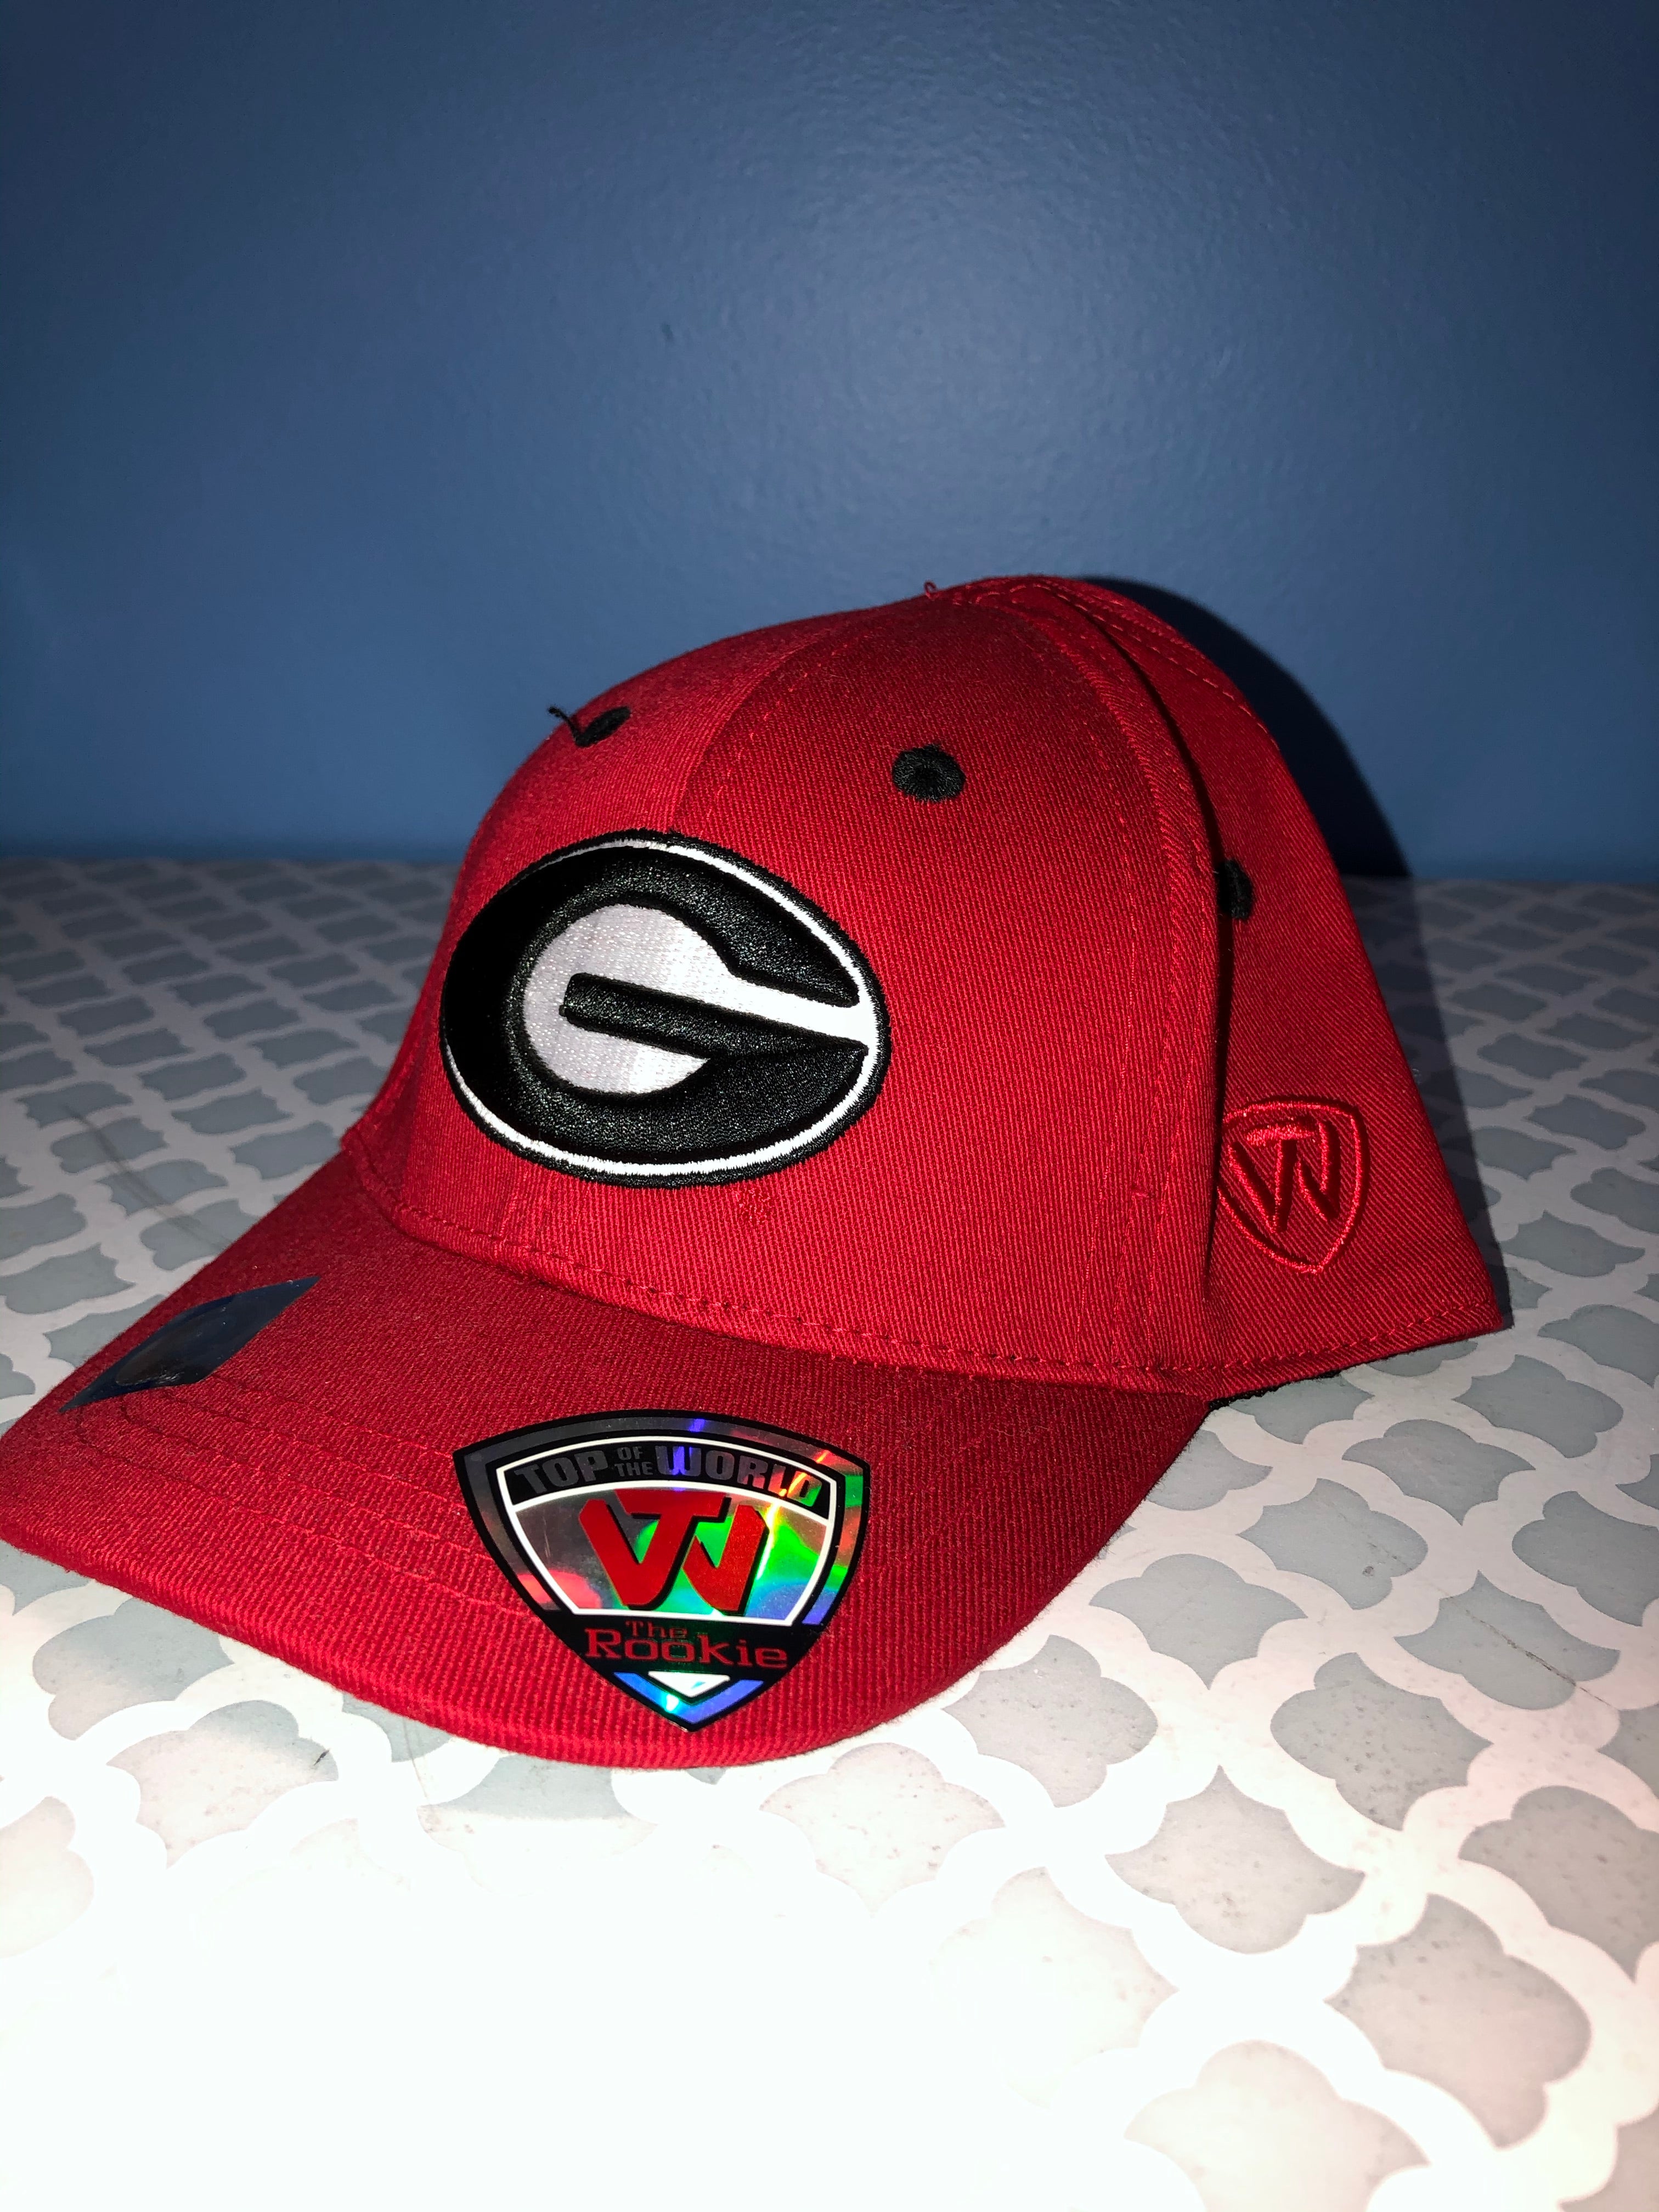 University of Georgia hat infant/small youth